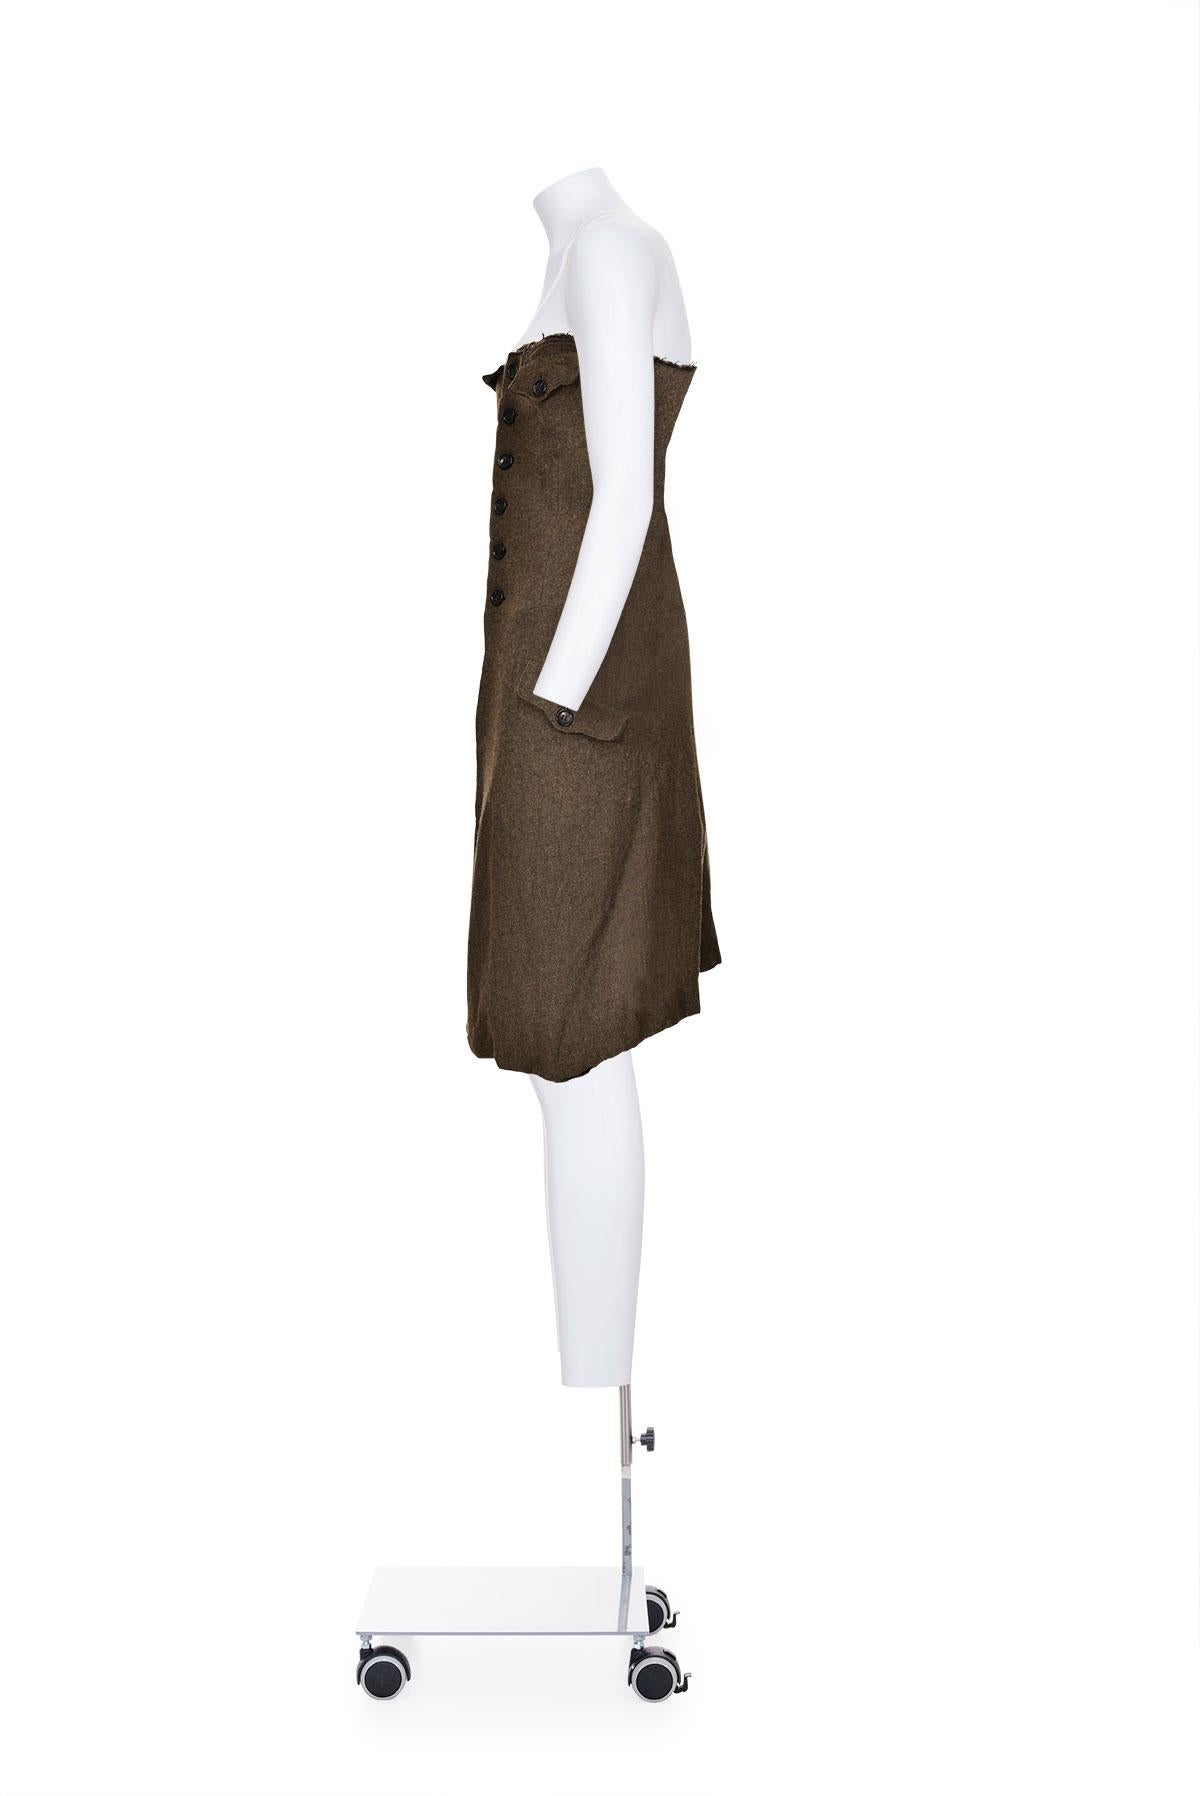 Fall Winter 1994 felted wool strapless military dress by Comme des Garçons. 
Buttons closure at the front. 
Pockets at chest and hips. 
Raw edges.
The composition is 90% wool and 10% nylon. 